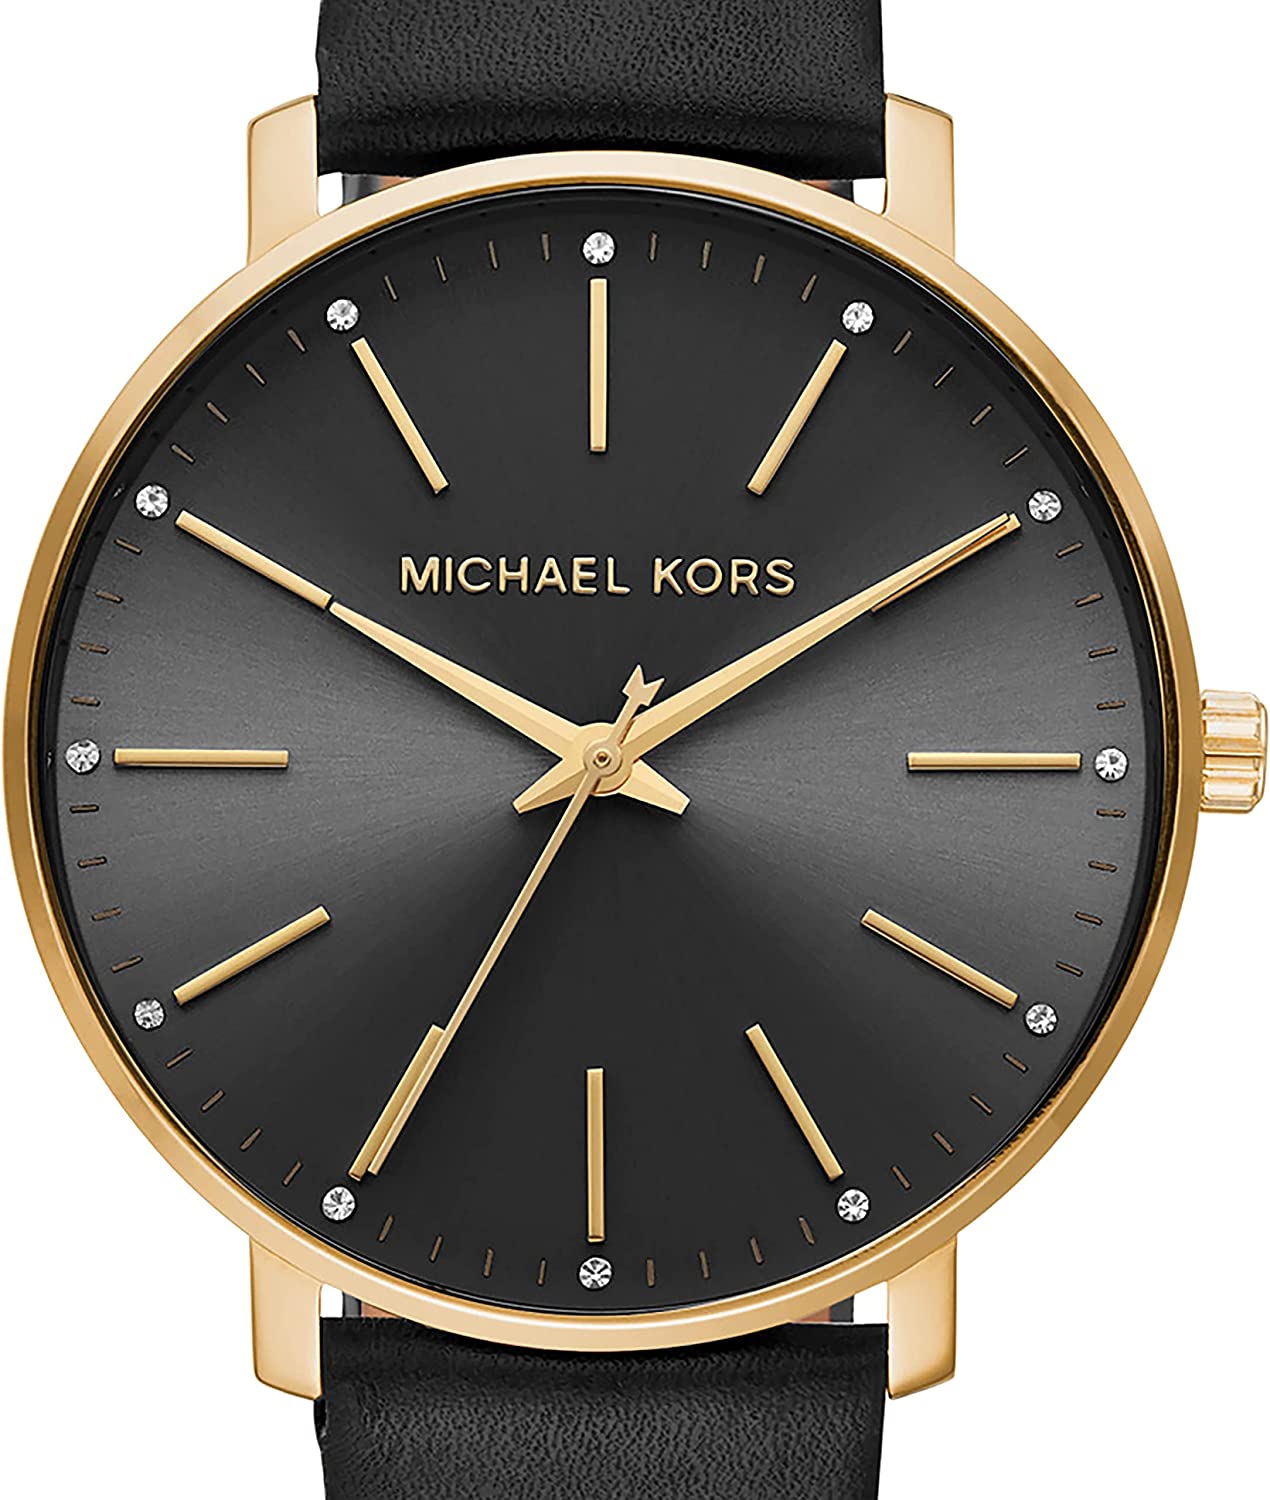 Michael Kors Women's Pyper Stainless Steel Quartz Watch with Leather Strap, Gold/Black, 18